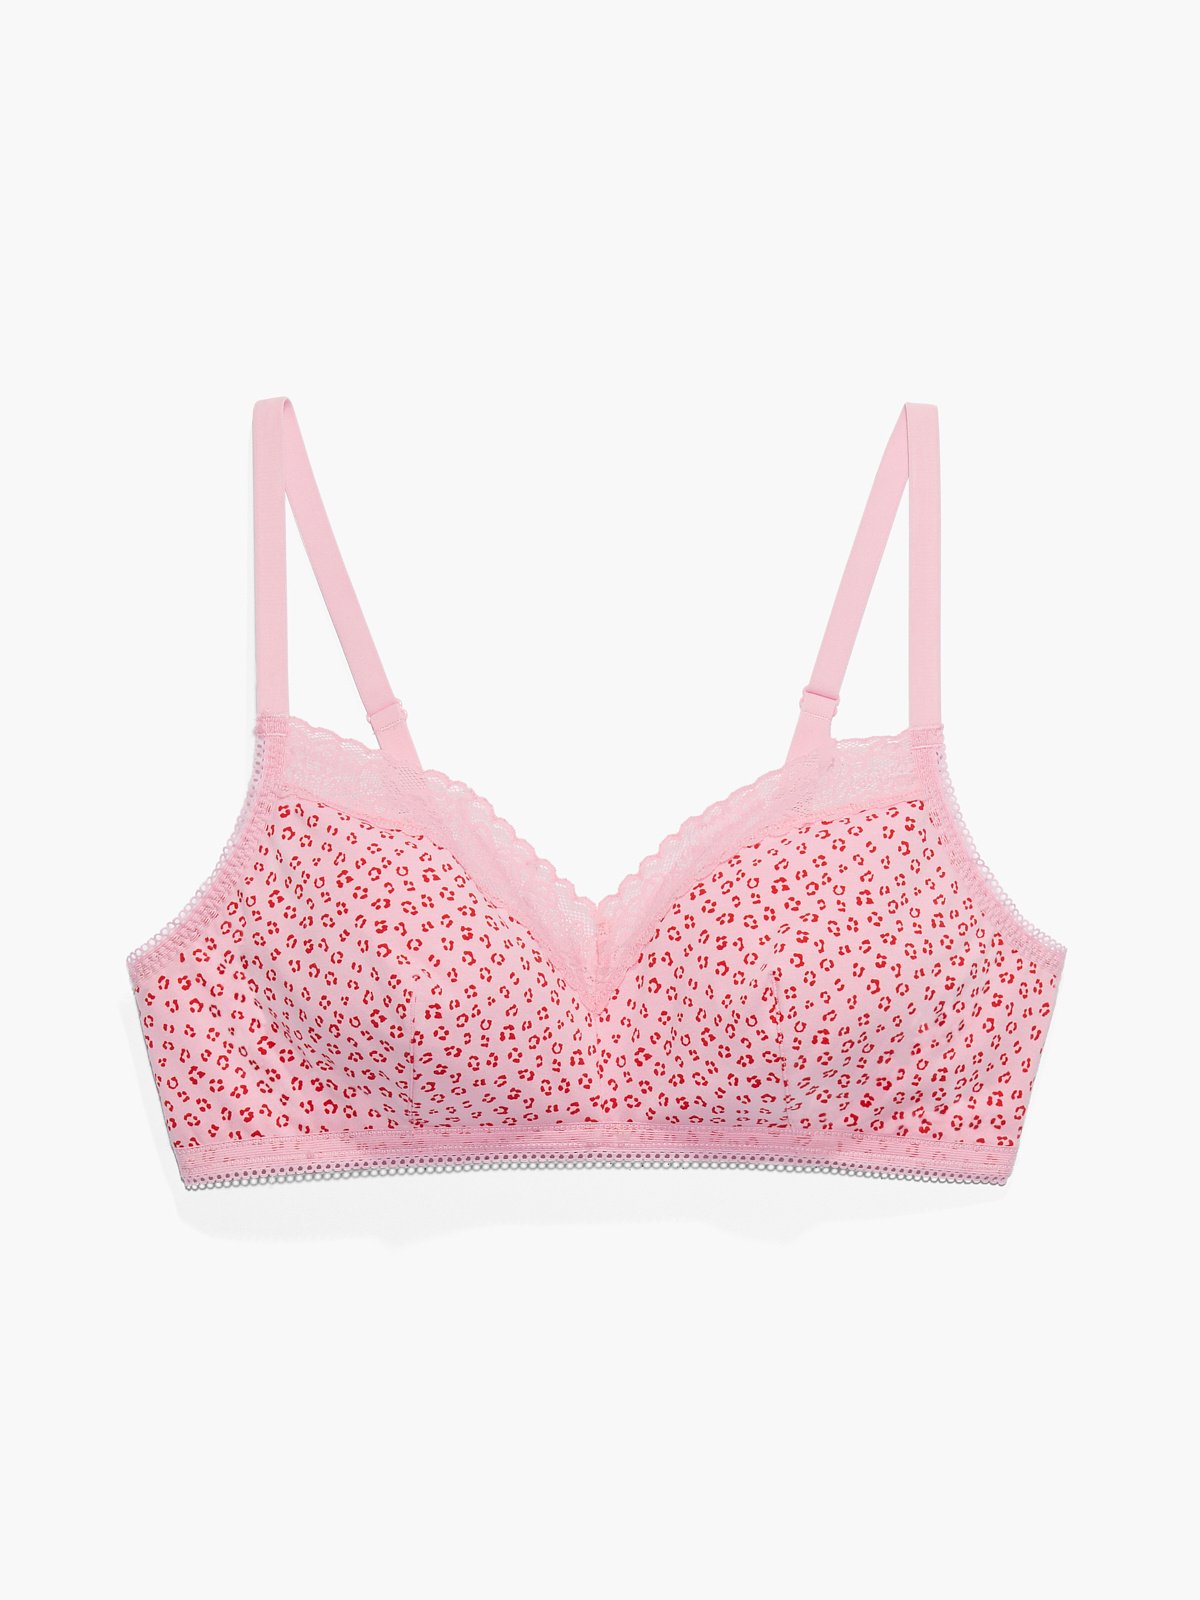 Buy Da Intimo Cotton Lace Bralette - Pink online